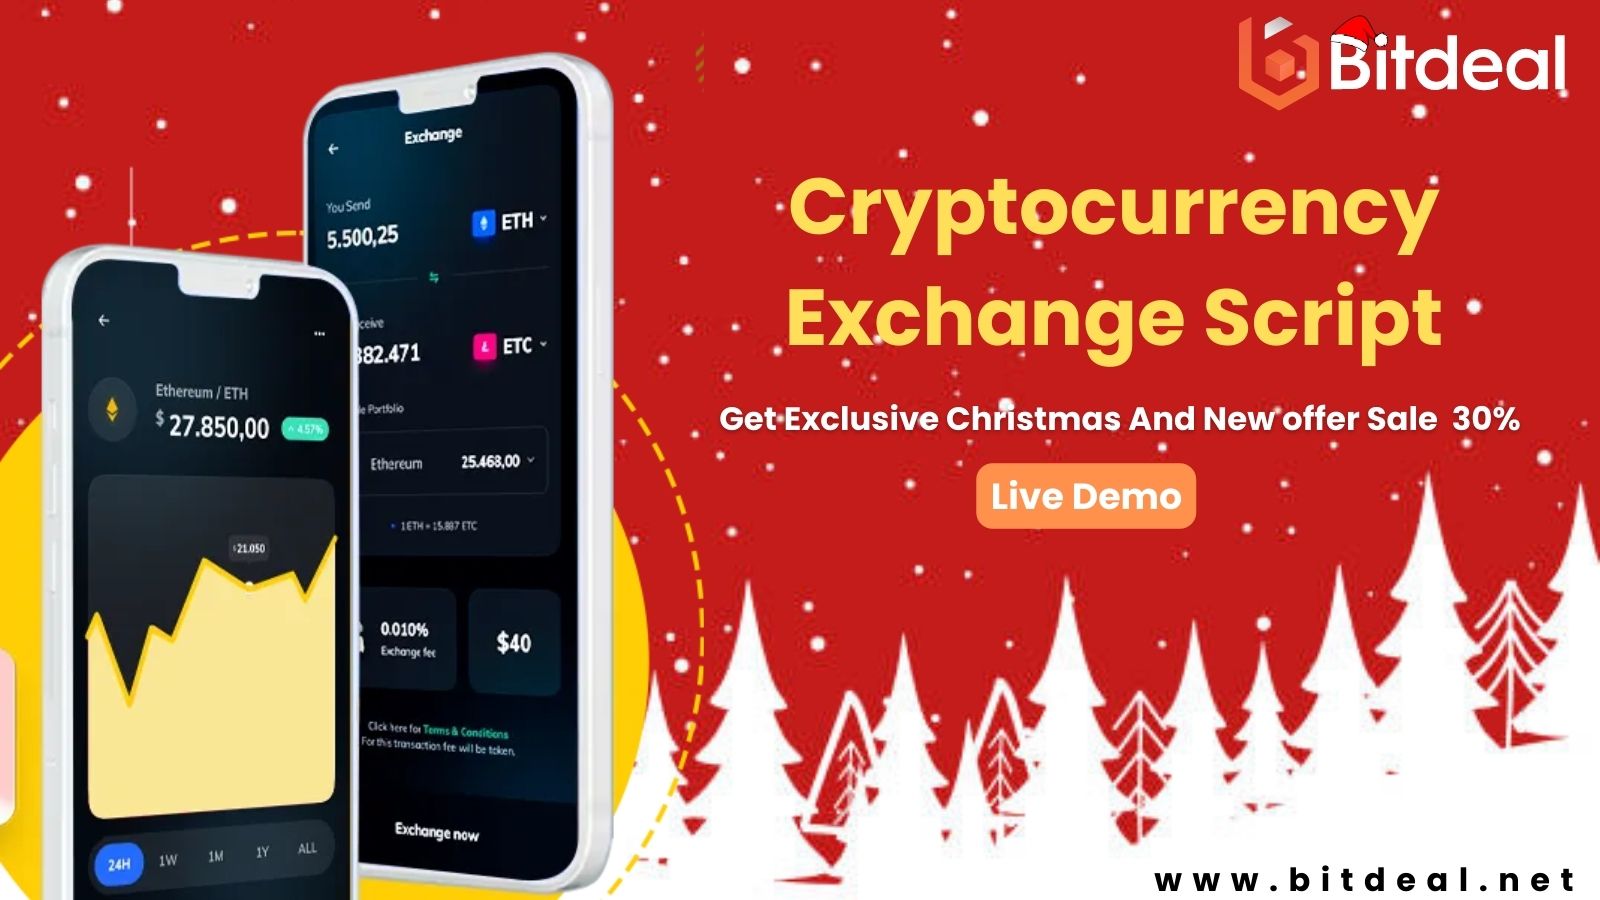 Get A Exclusive Christmas & New year Sale 30% Offer on Cryptocurrency Exchange Script